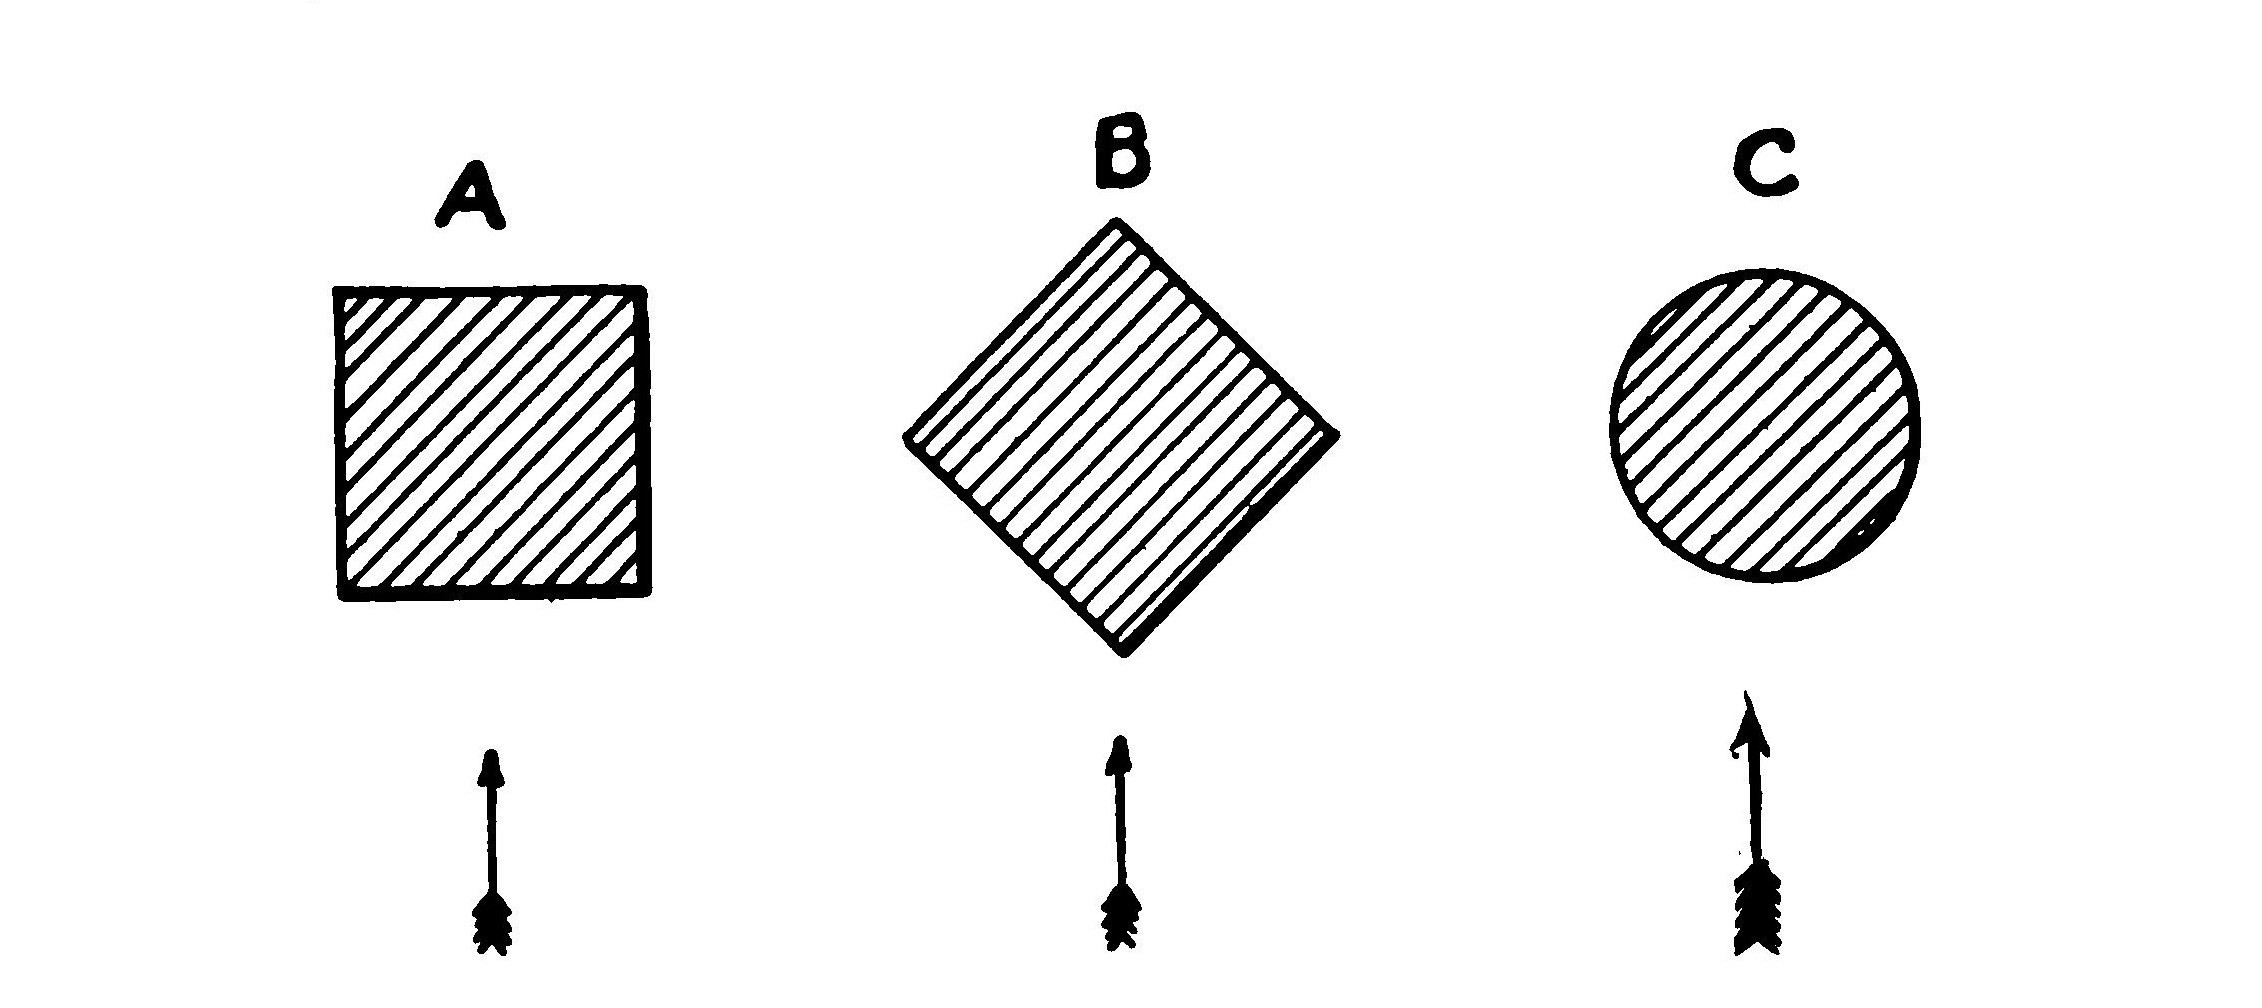 FIG. 9. Of the three shapes shown above, the round one will slip through the air with the least disturbance and resistance.